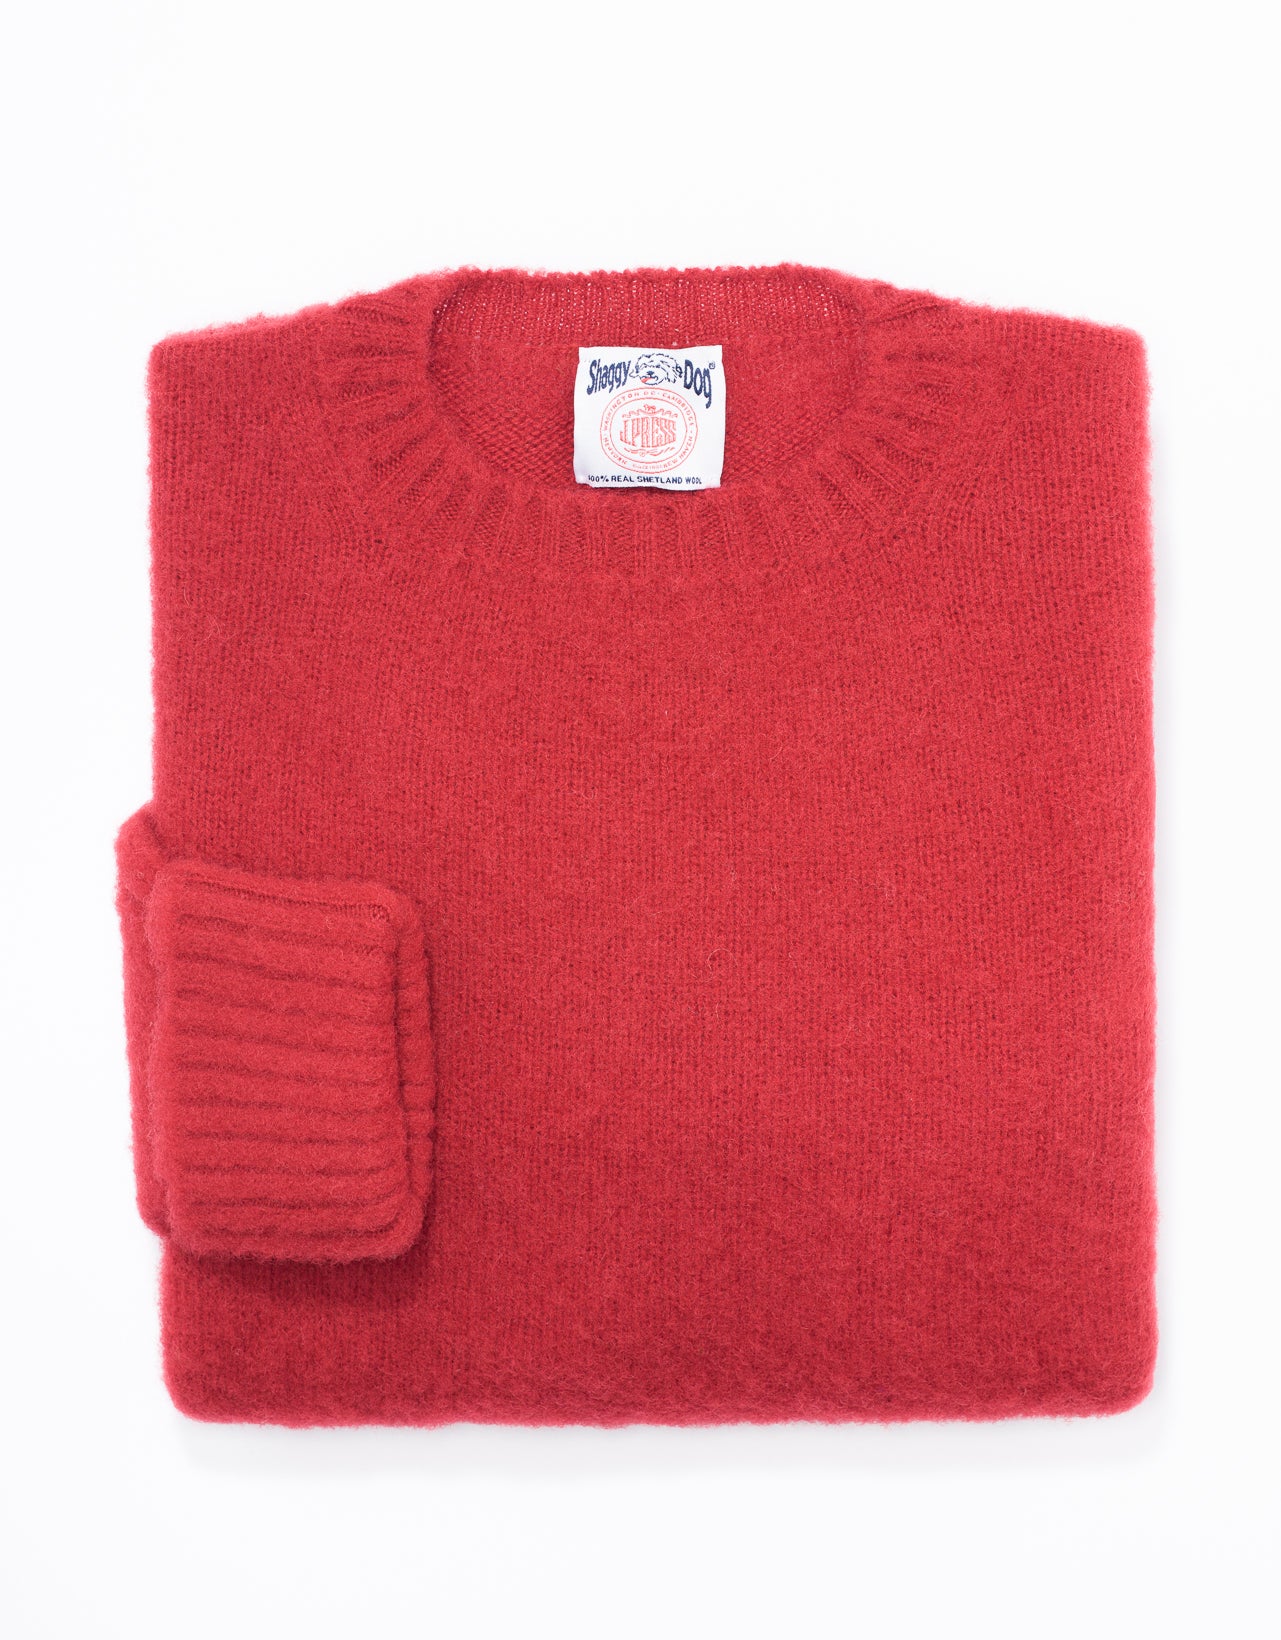 SHAGGY DOG SWEATER RED - CLASSIC FIT